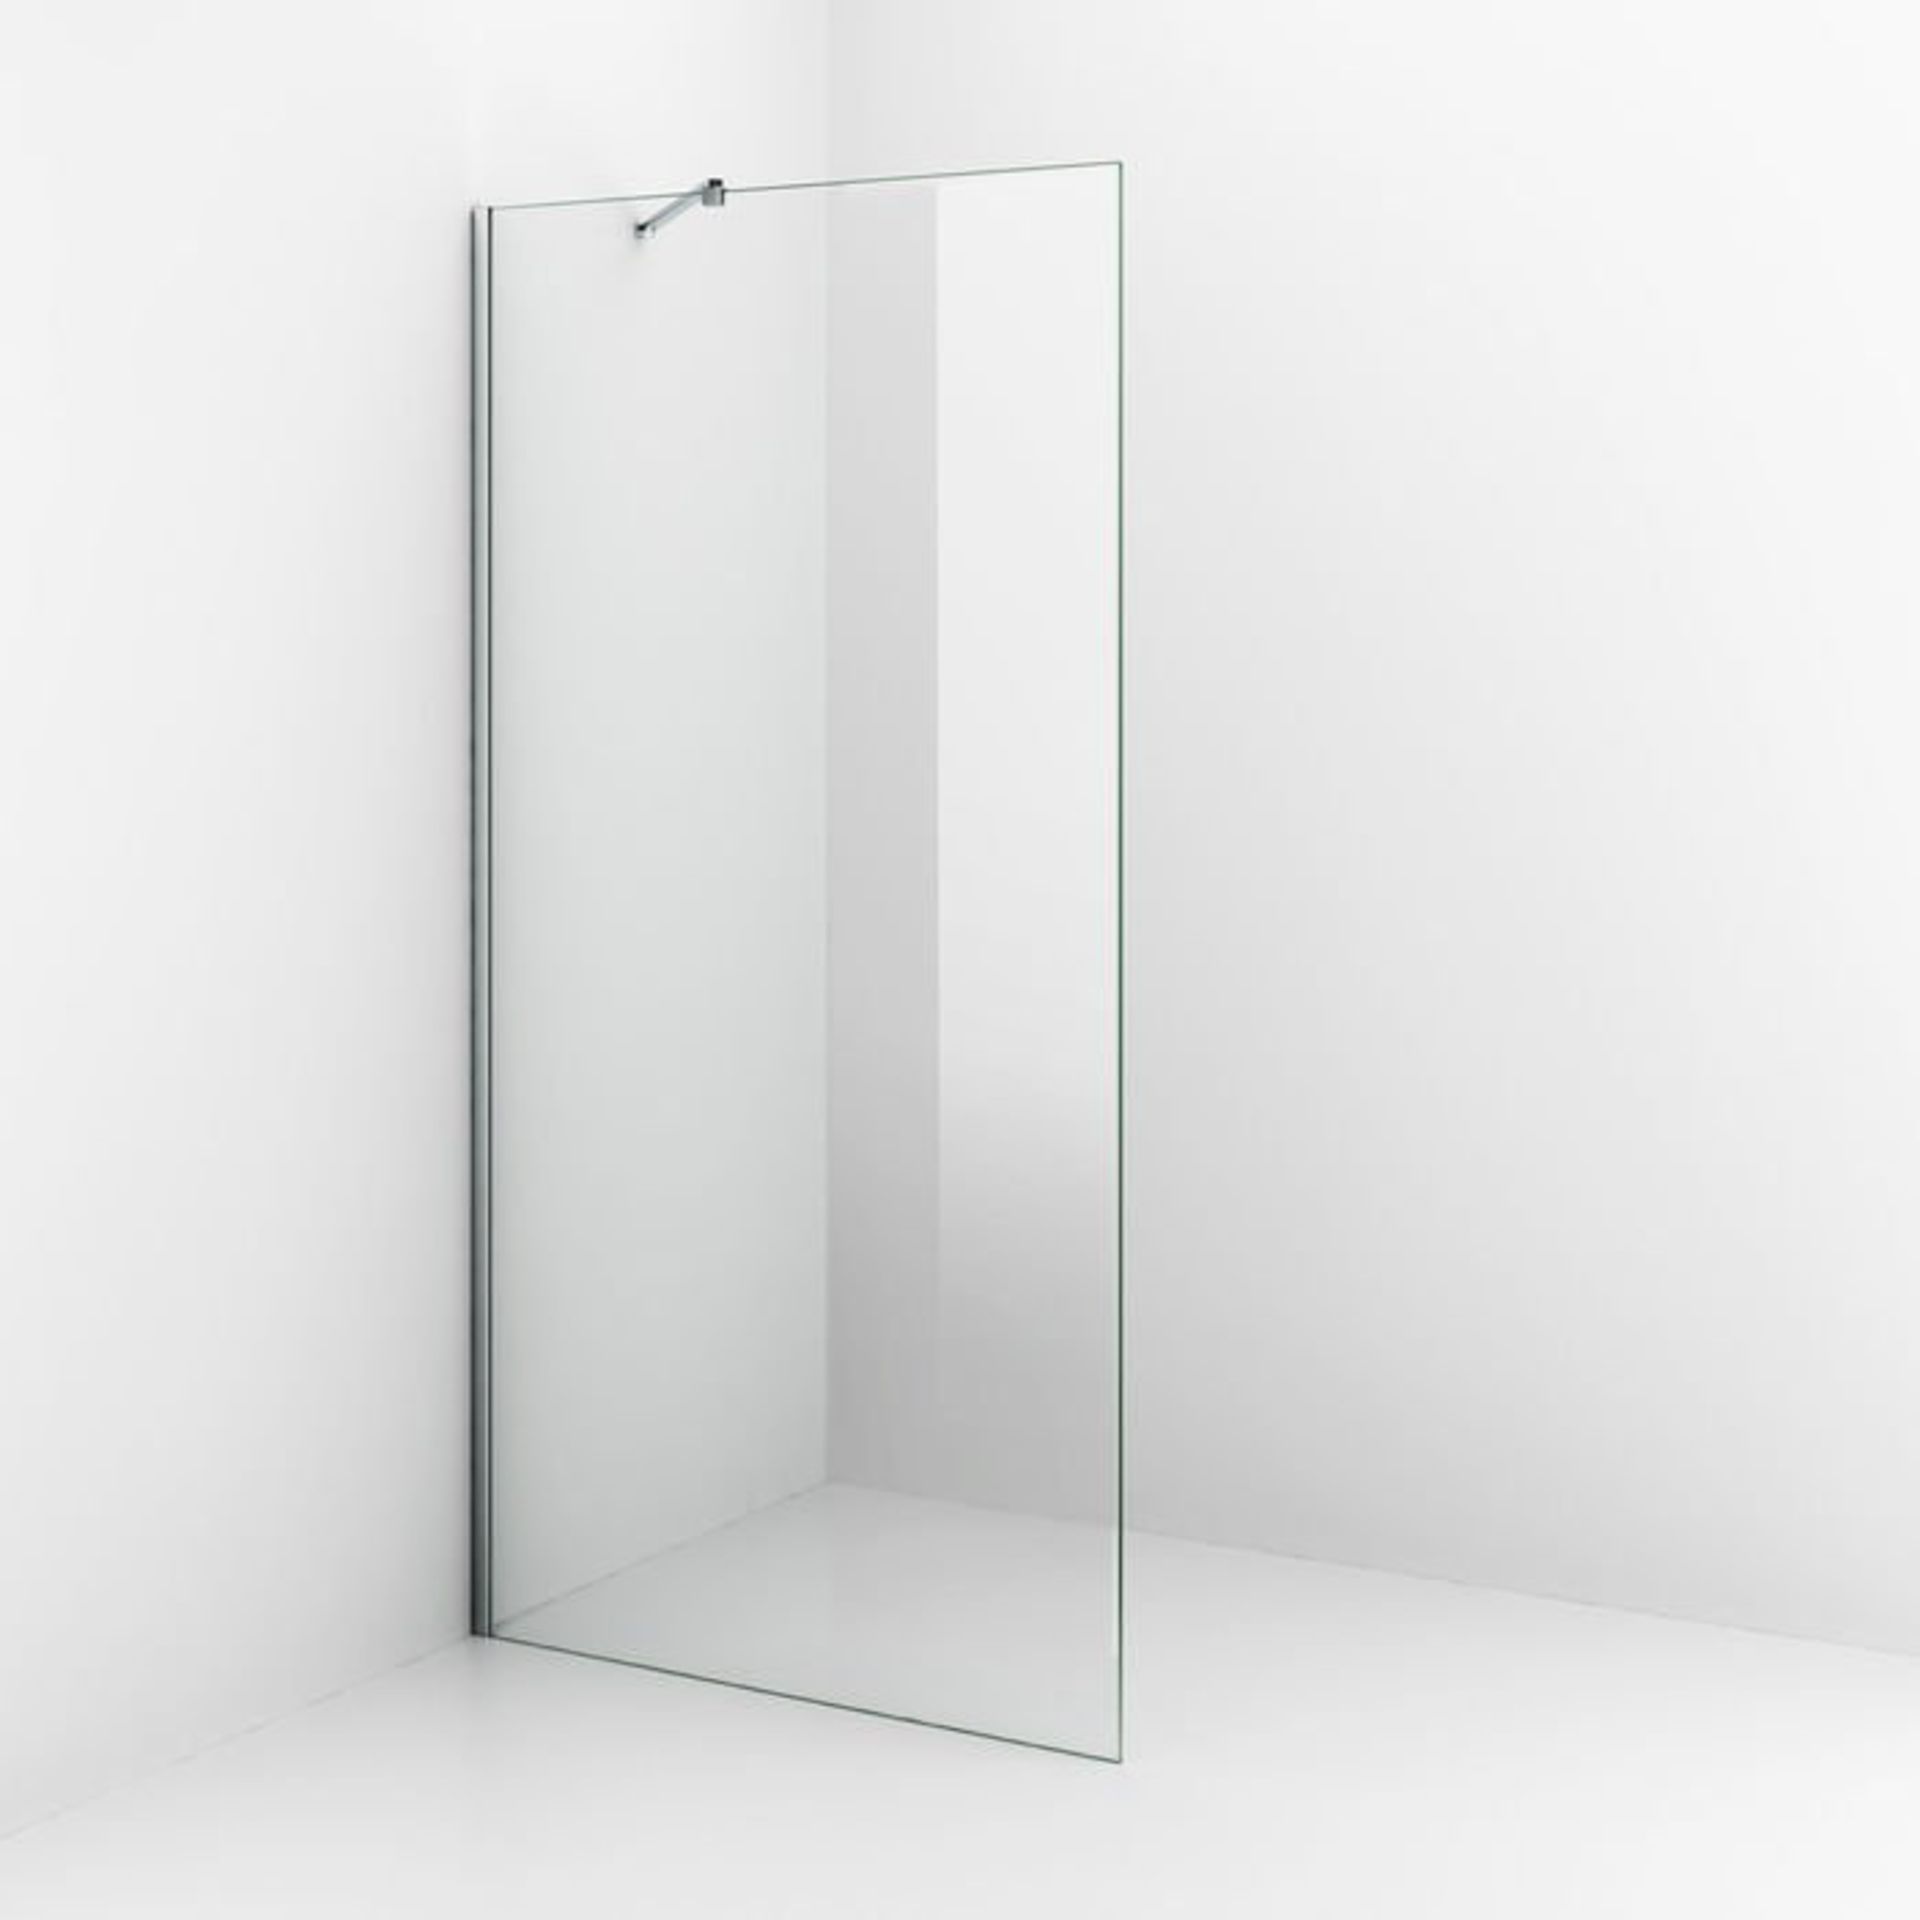 (S117) 800mm - 8mm - Premium EasyClean Wetroom Panel. RRP £299.99. 8mm EasyClean glass - Our glass - Image 3 of 4